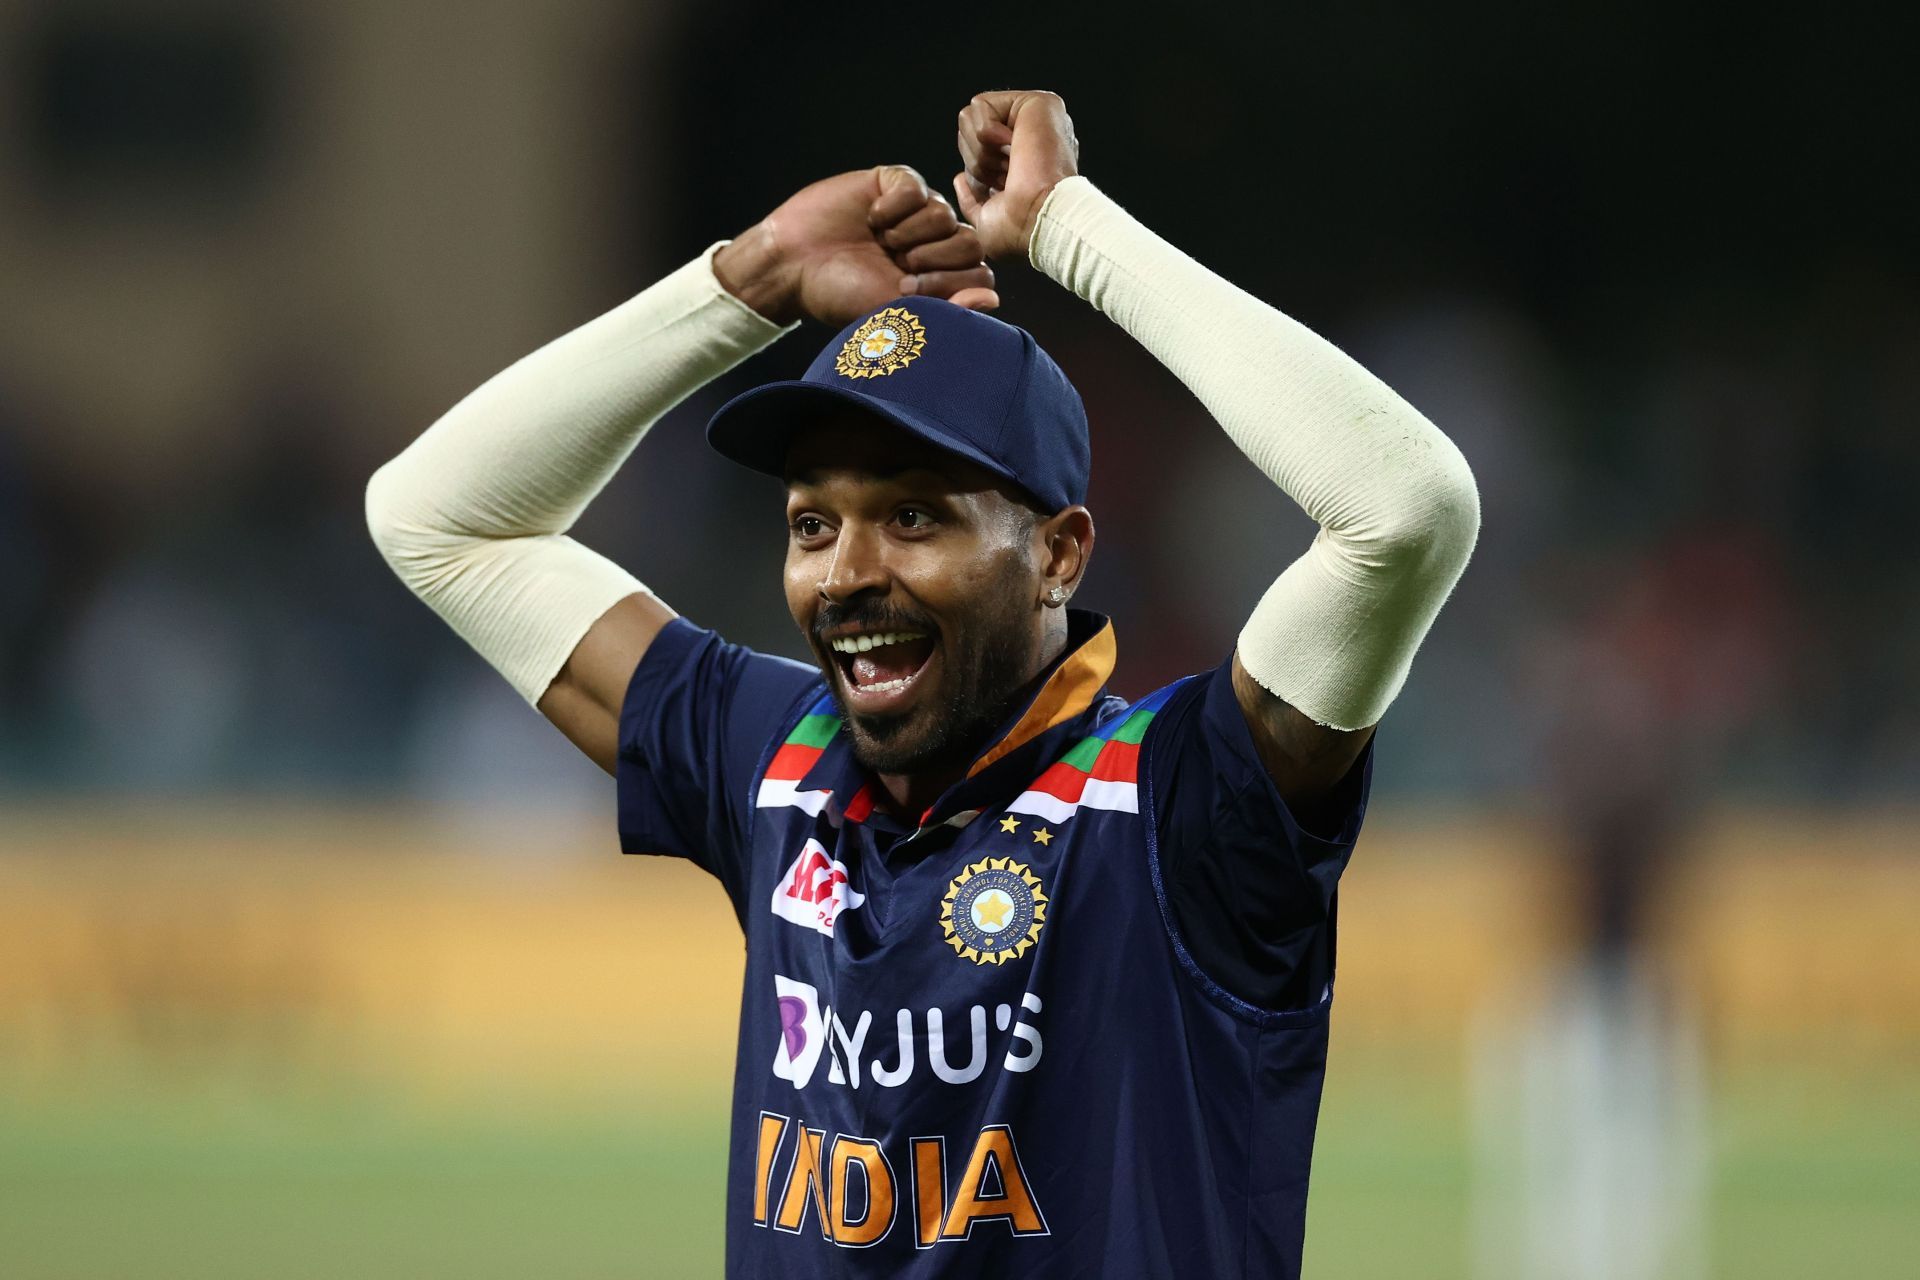 Hardin Pandya has captained the team with great maturity